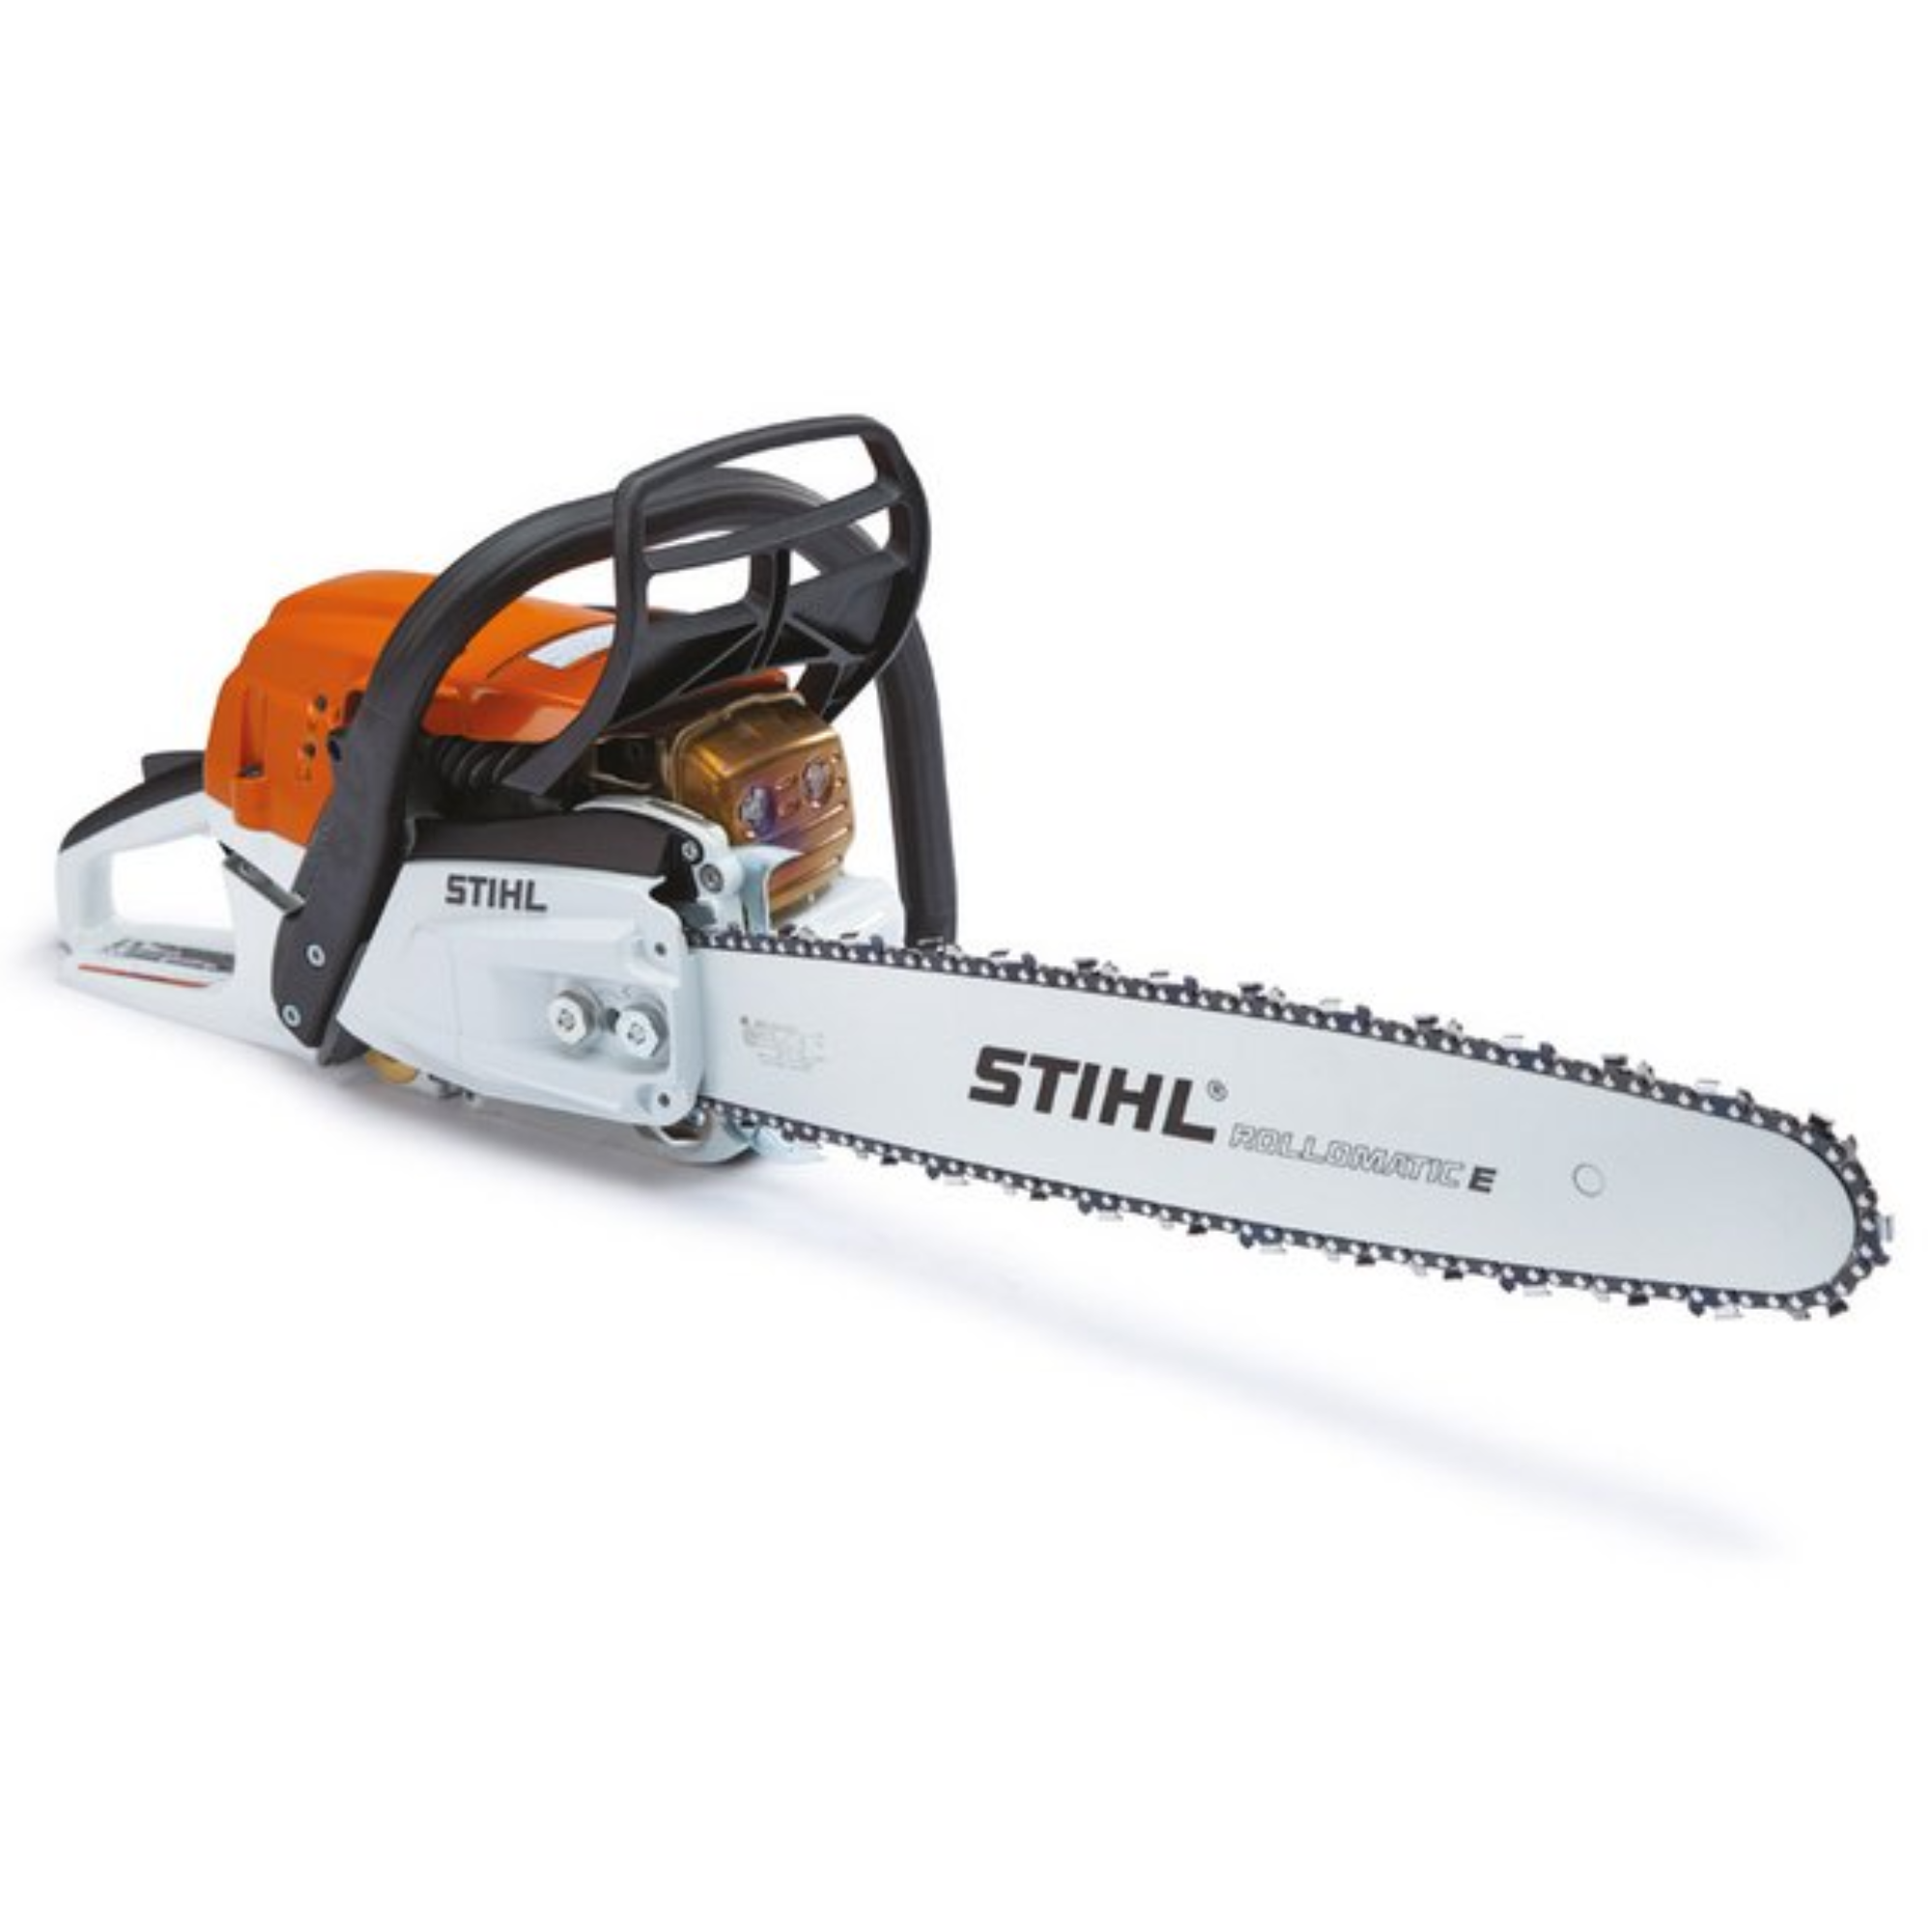 STIHL MS 180 Fuel Chainsaw Price in India - Buy STIHL MS 180 Fuel Chainsaw  online at